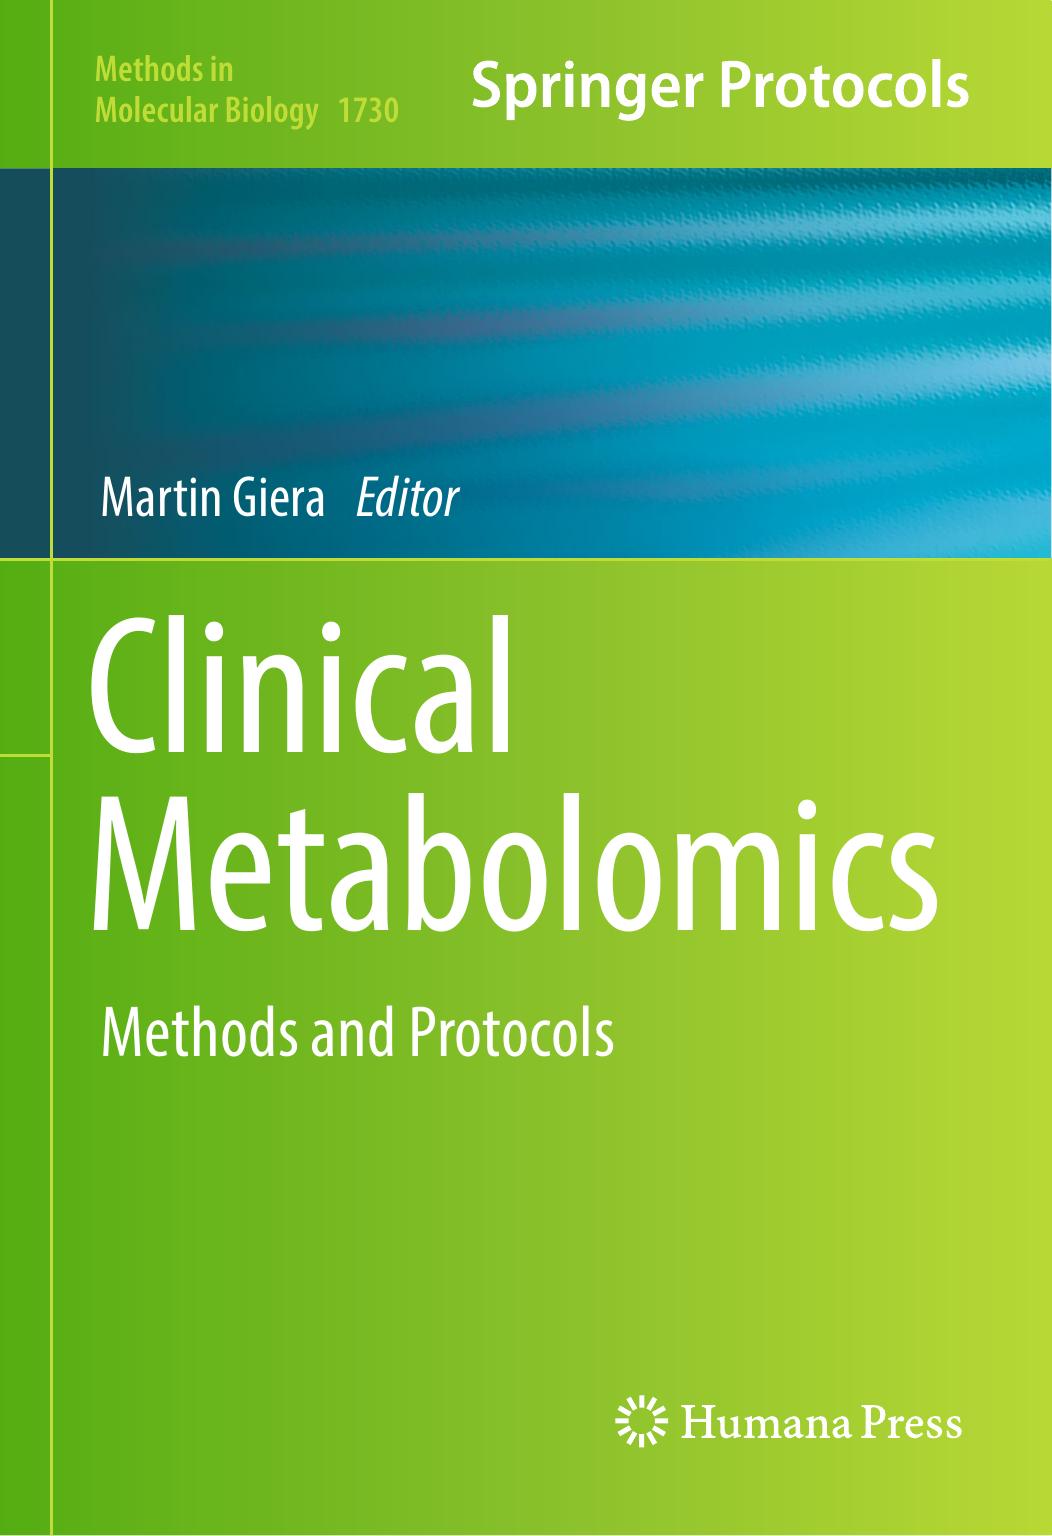 Clinical Metabolomics  Methods and Protocols 2018.pdf